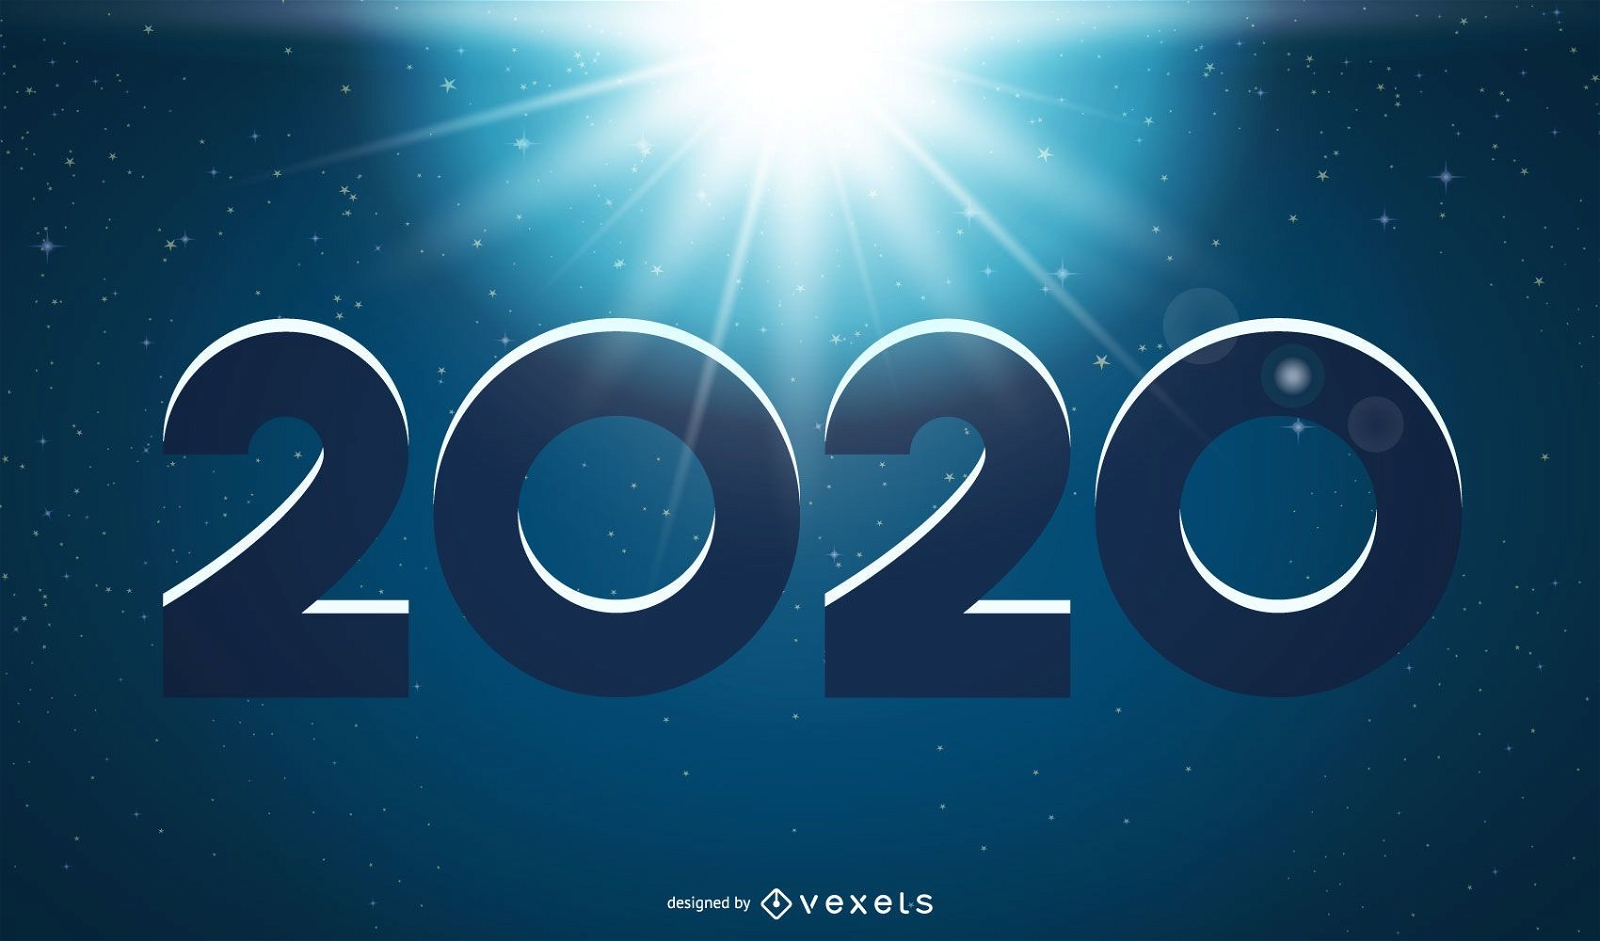 2020 New Year on Glowing Night Background